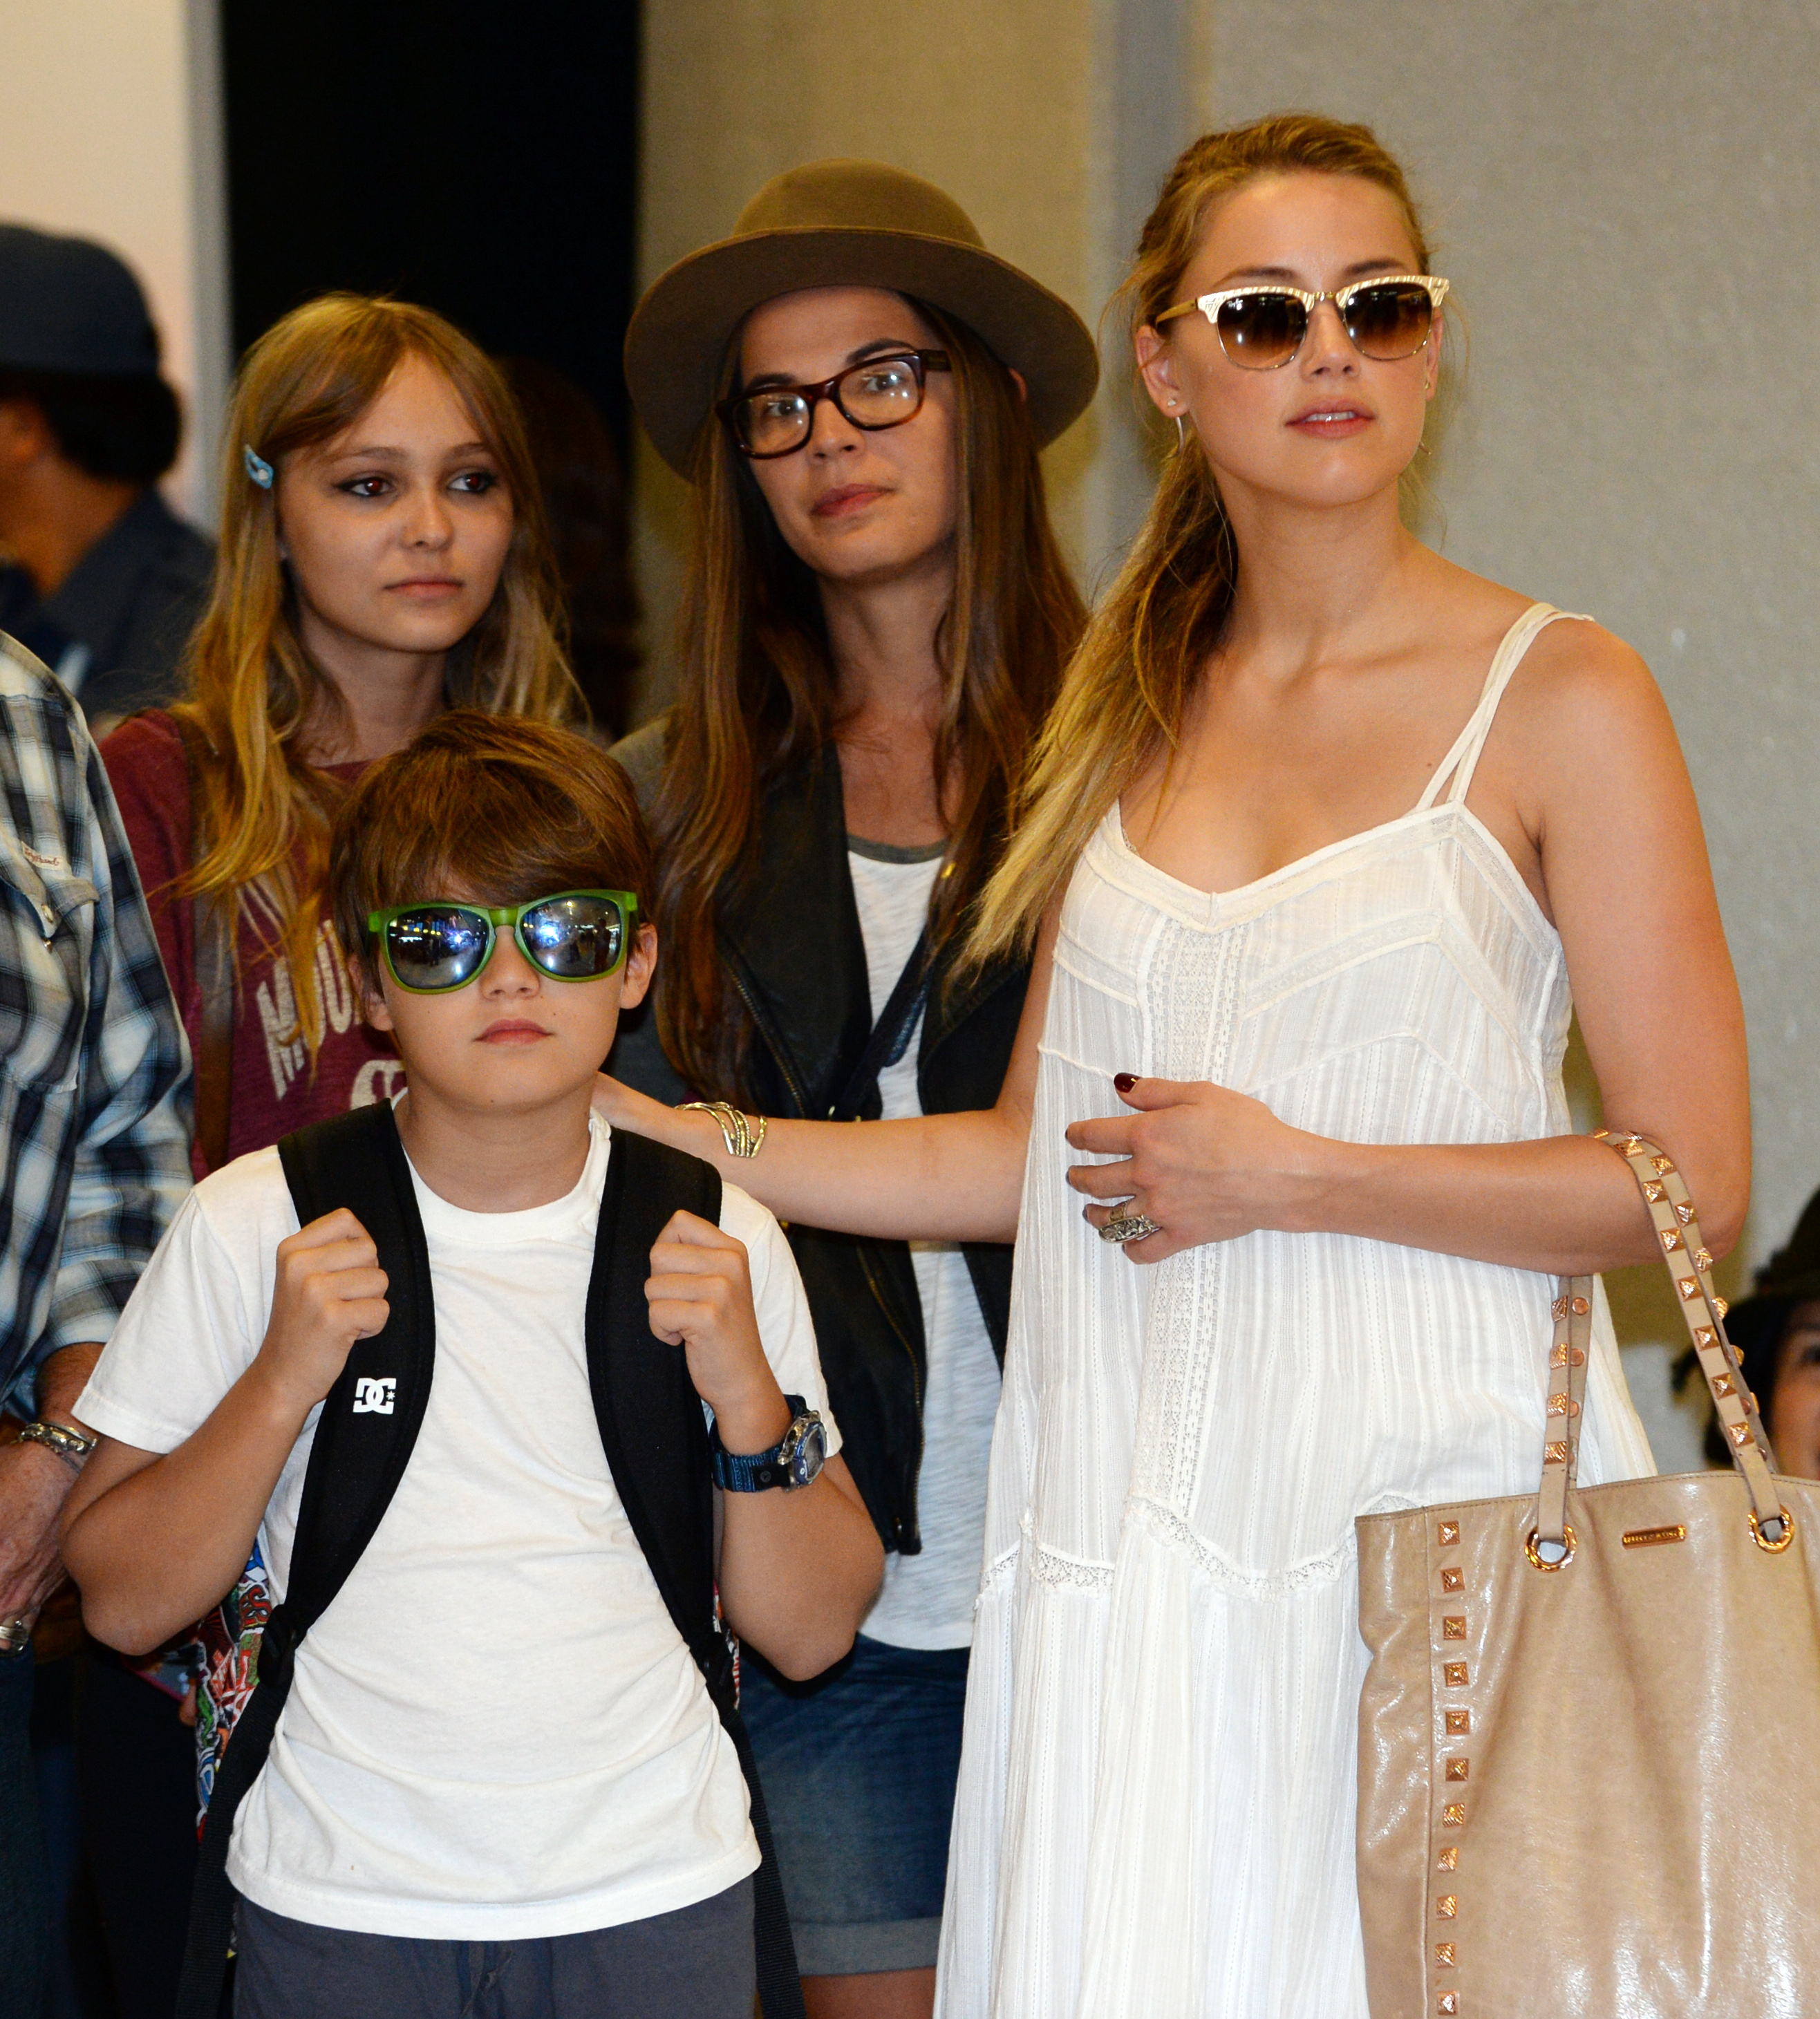 Jack and Lily-Rose Depp with Amber Heard in Narita, Japan, 2013 | Source: Getty Images